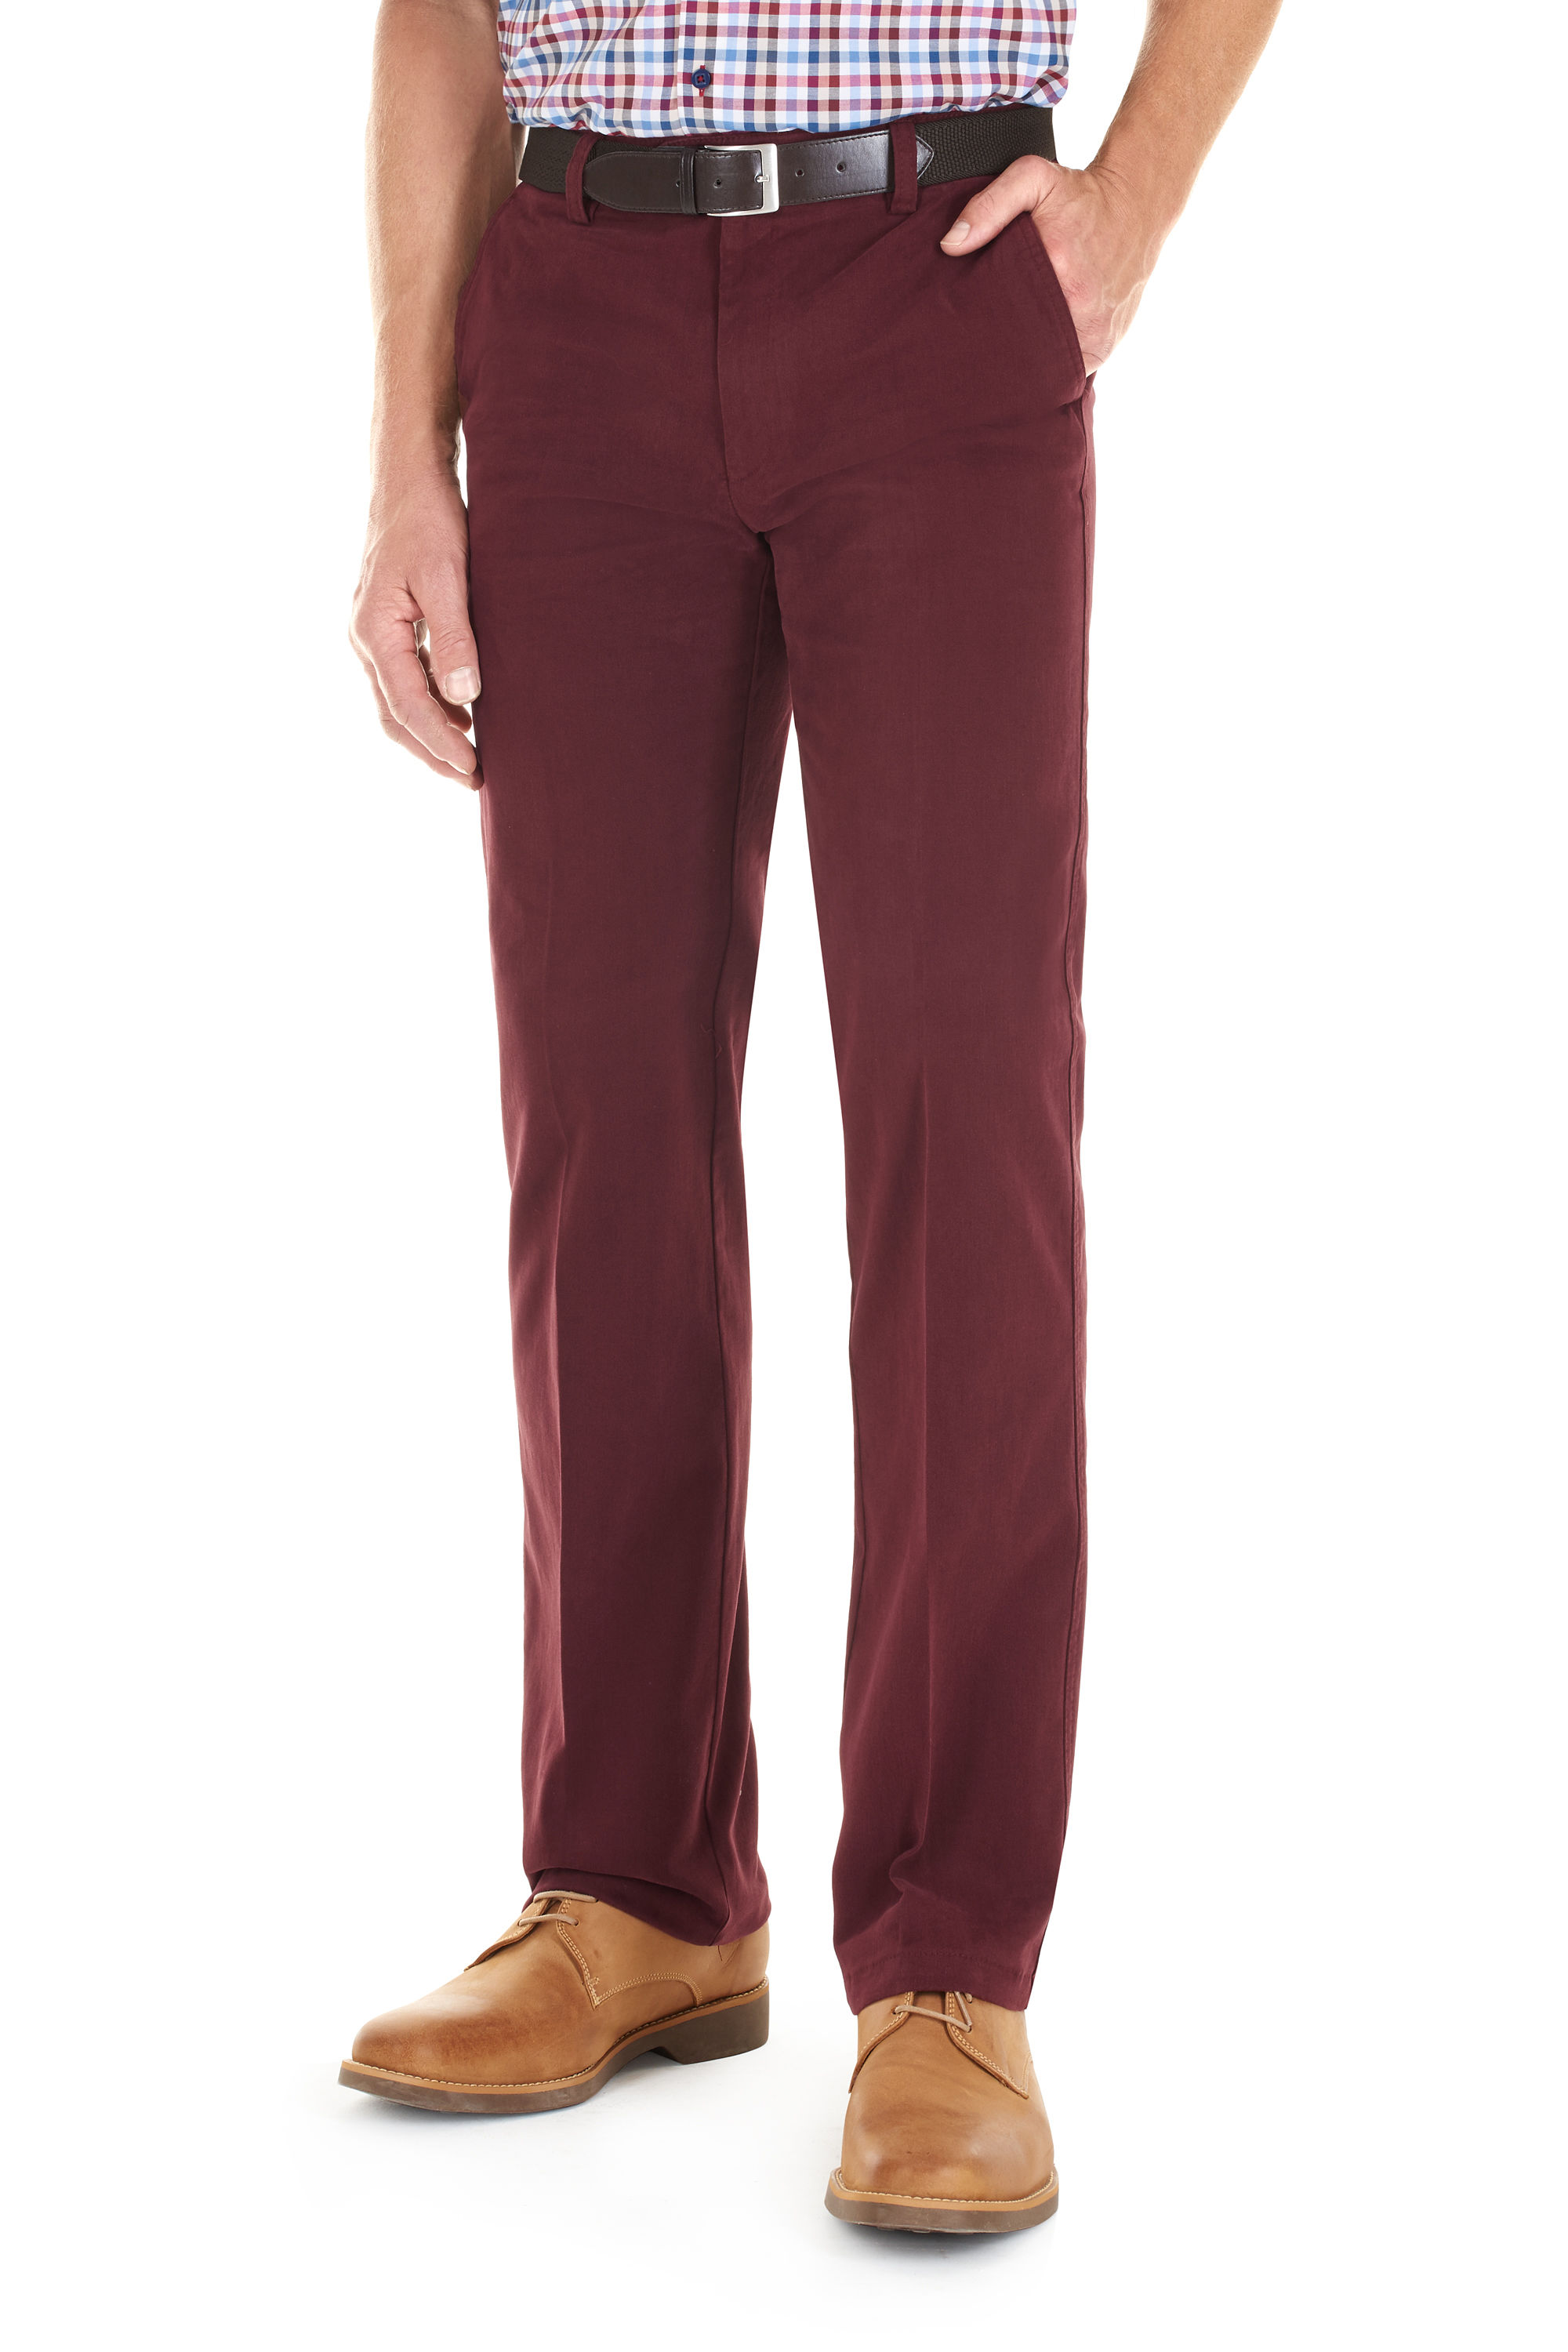 Best Chinos For Men, Stretch Trousers